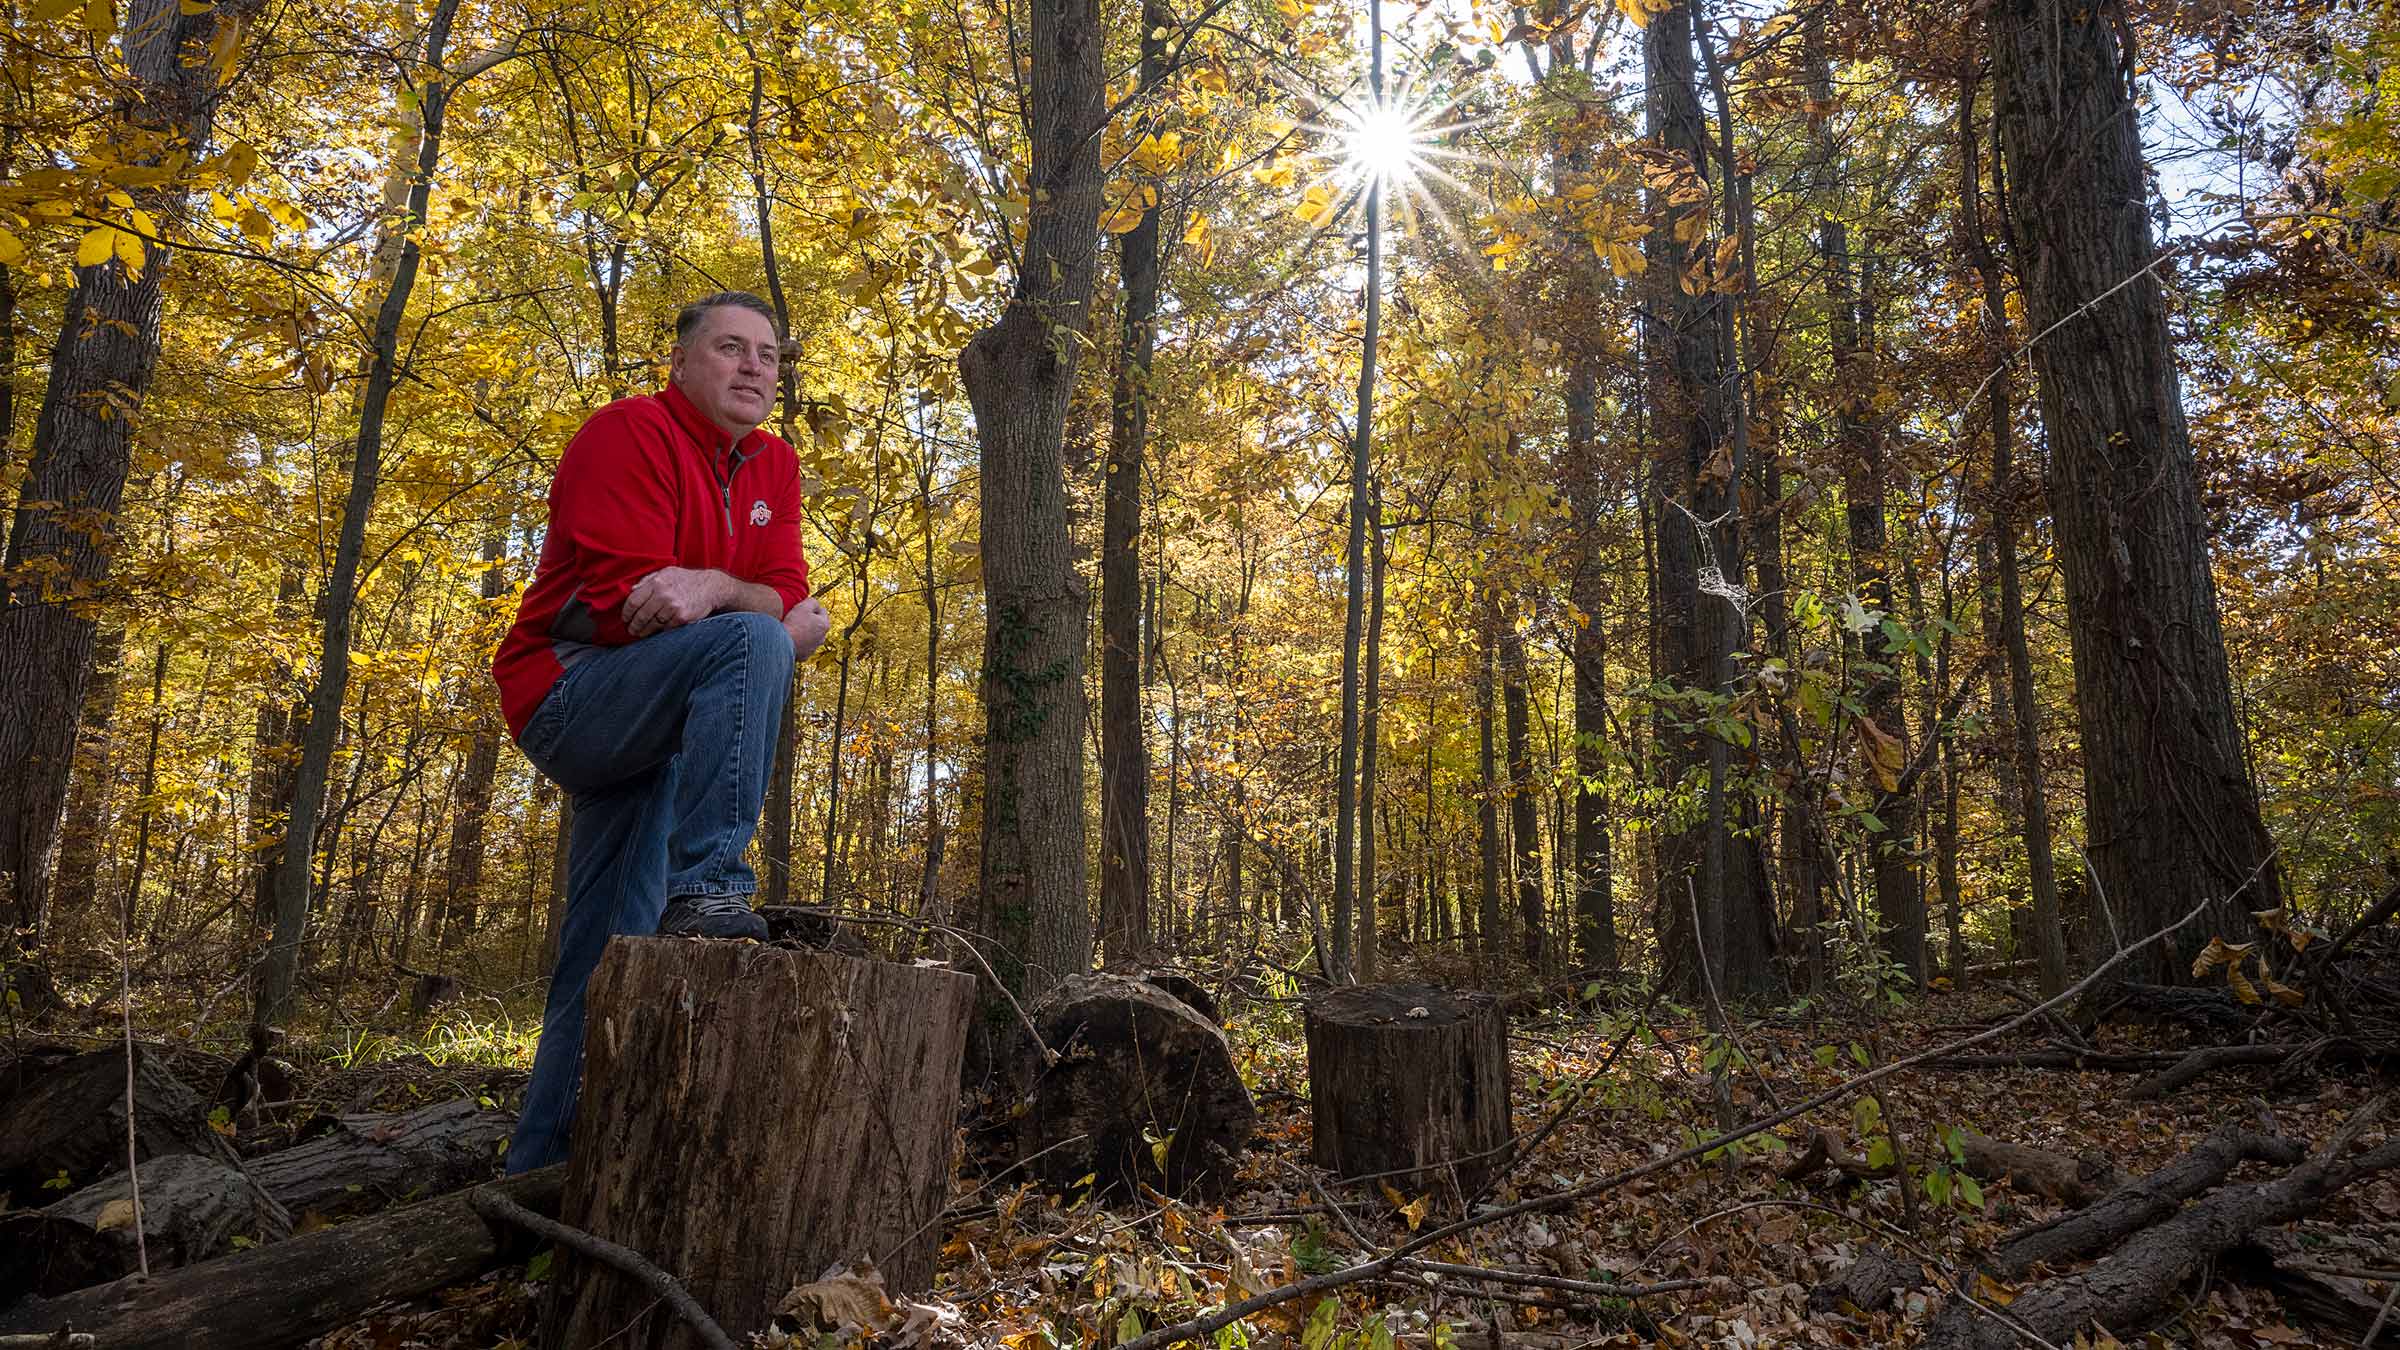 Duane Gross smiling in the woods near his home